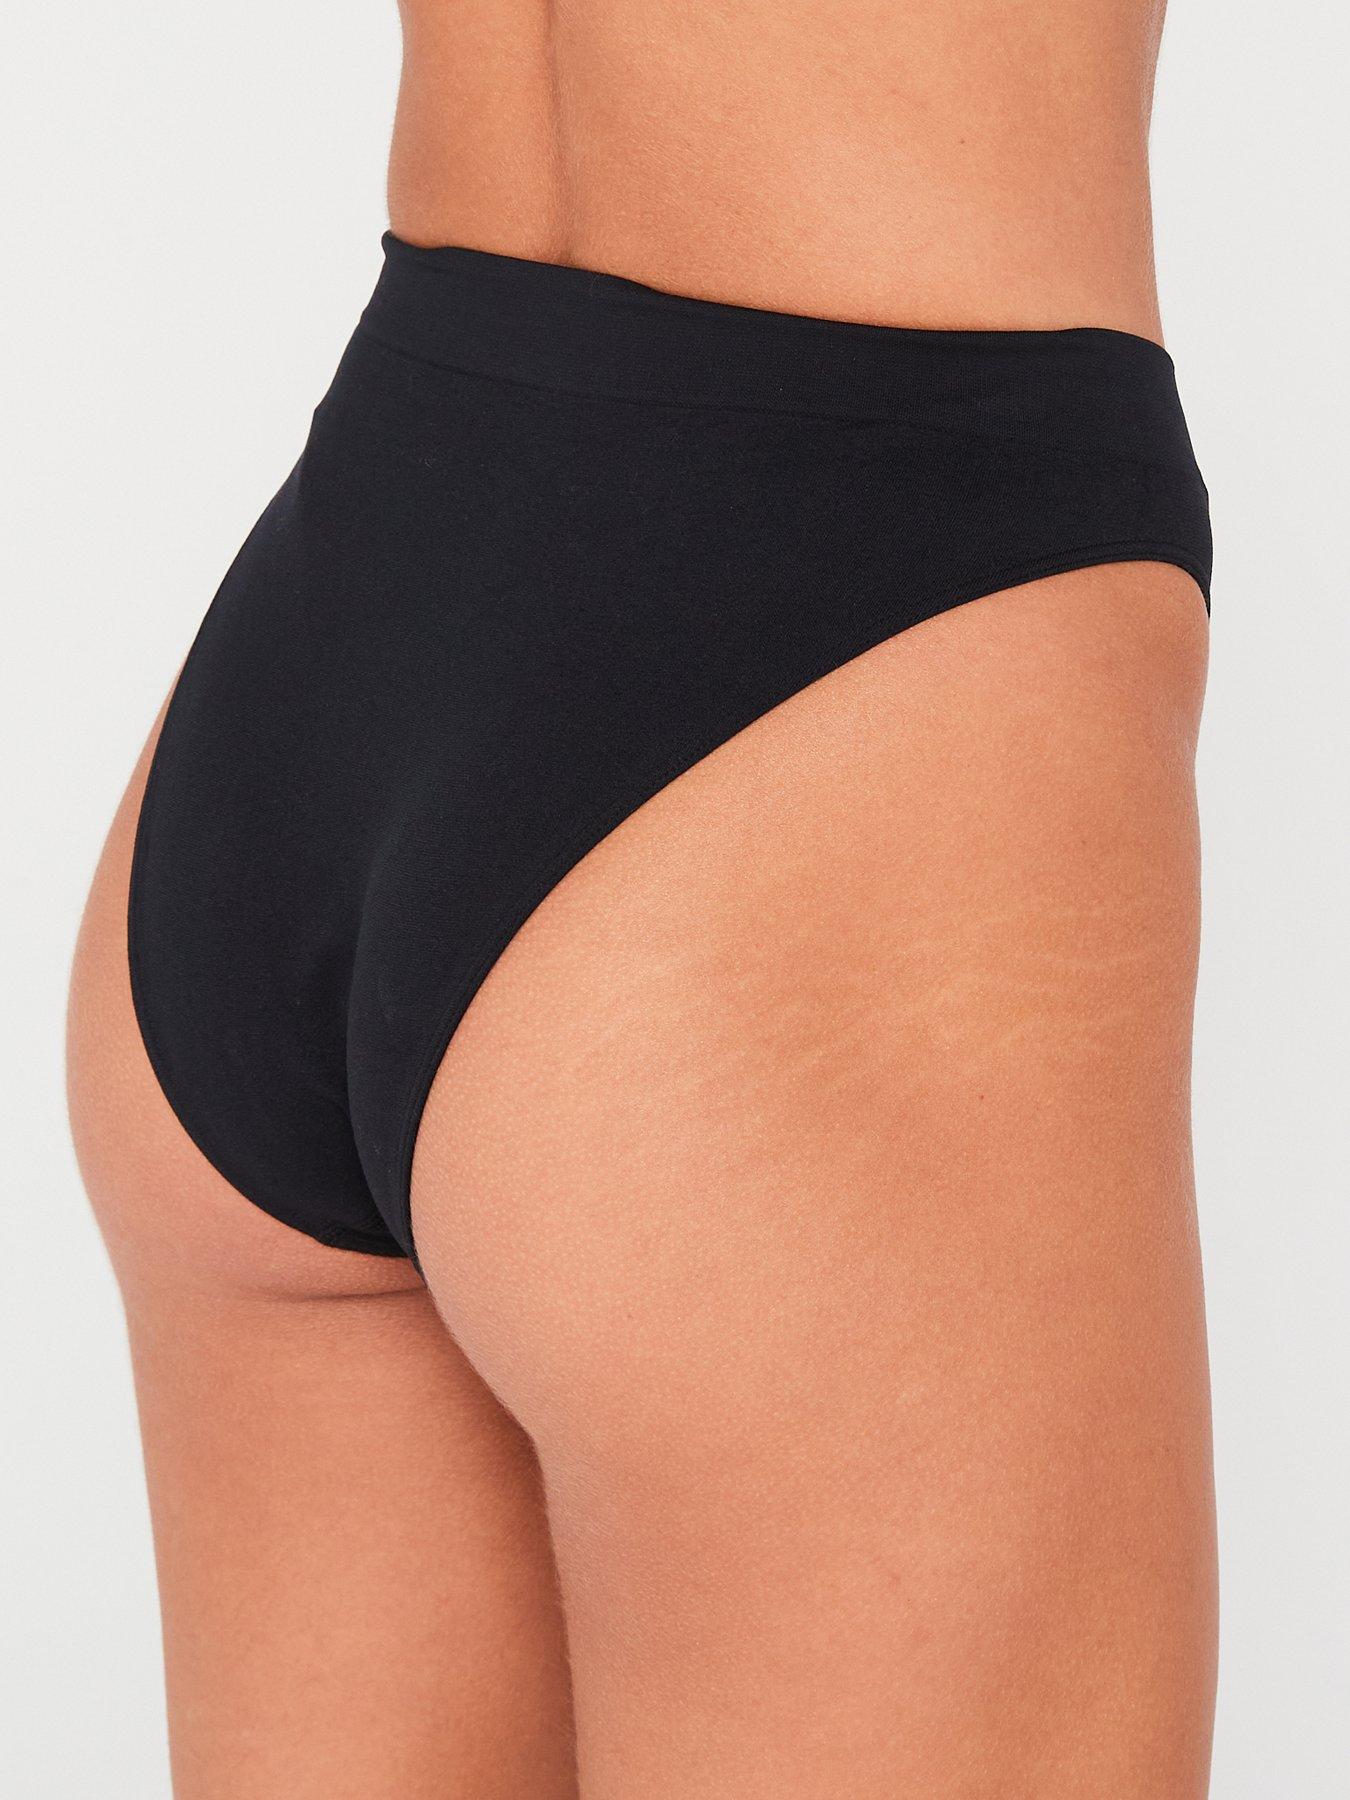 High Leg Knickers 3 Pack, Sale & Offers